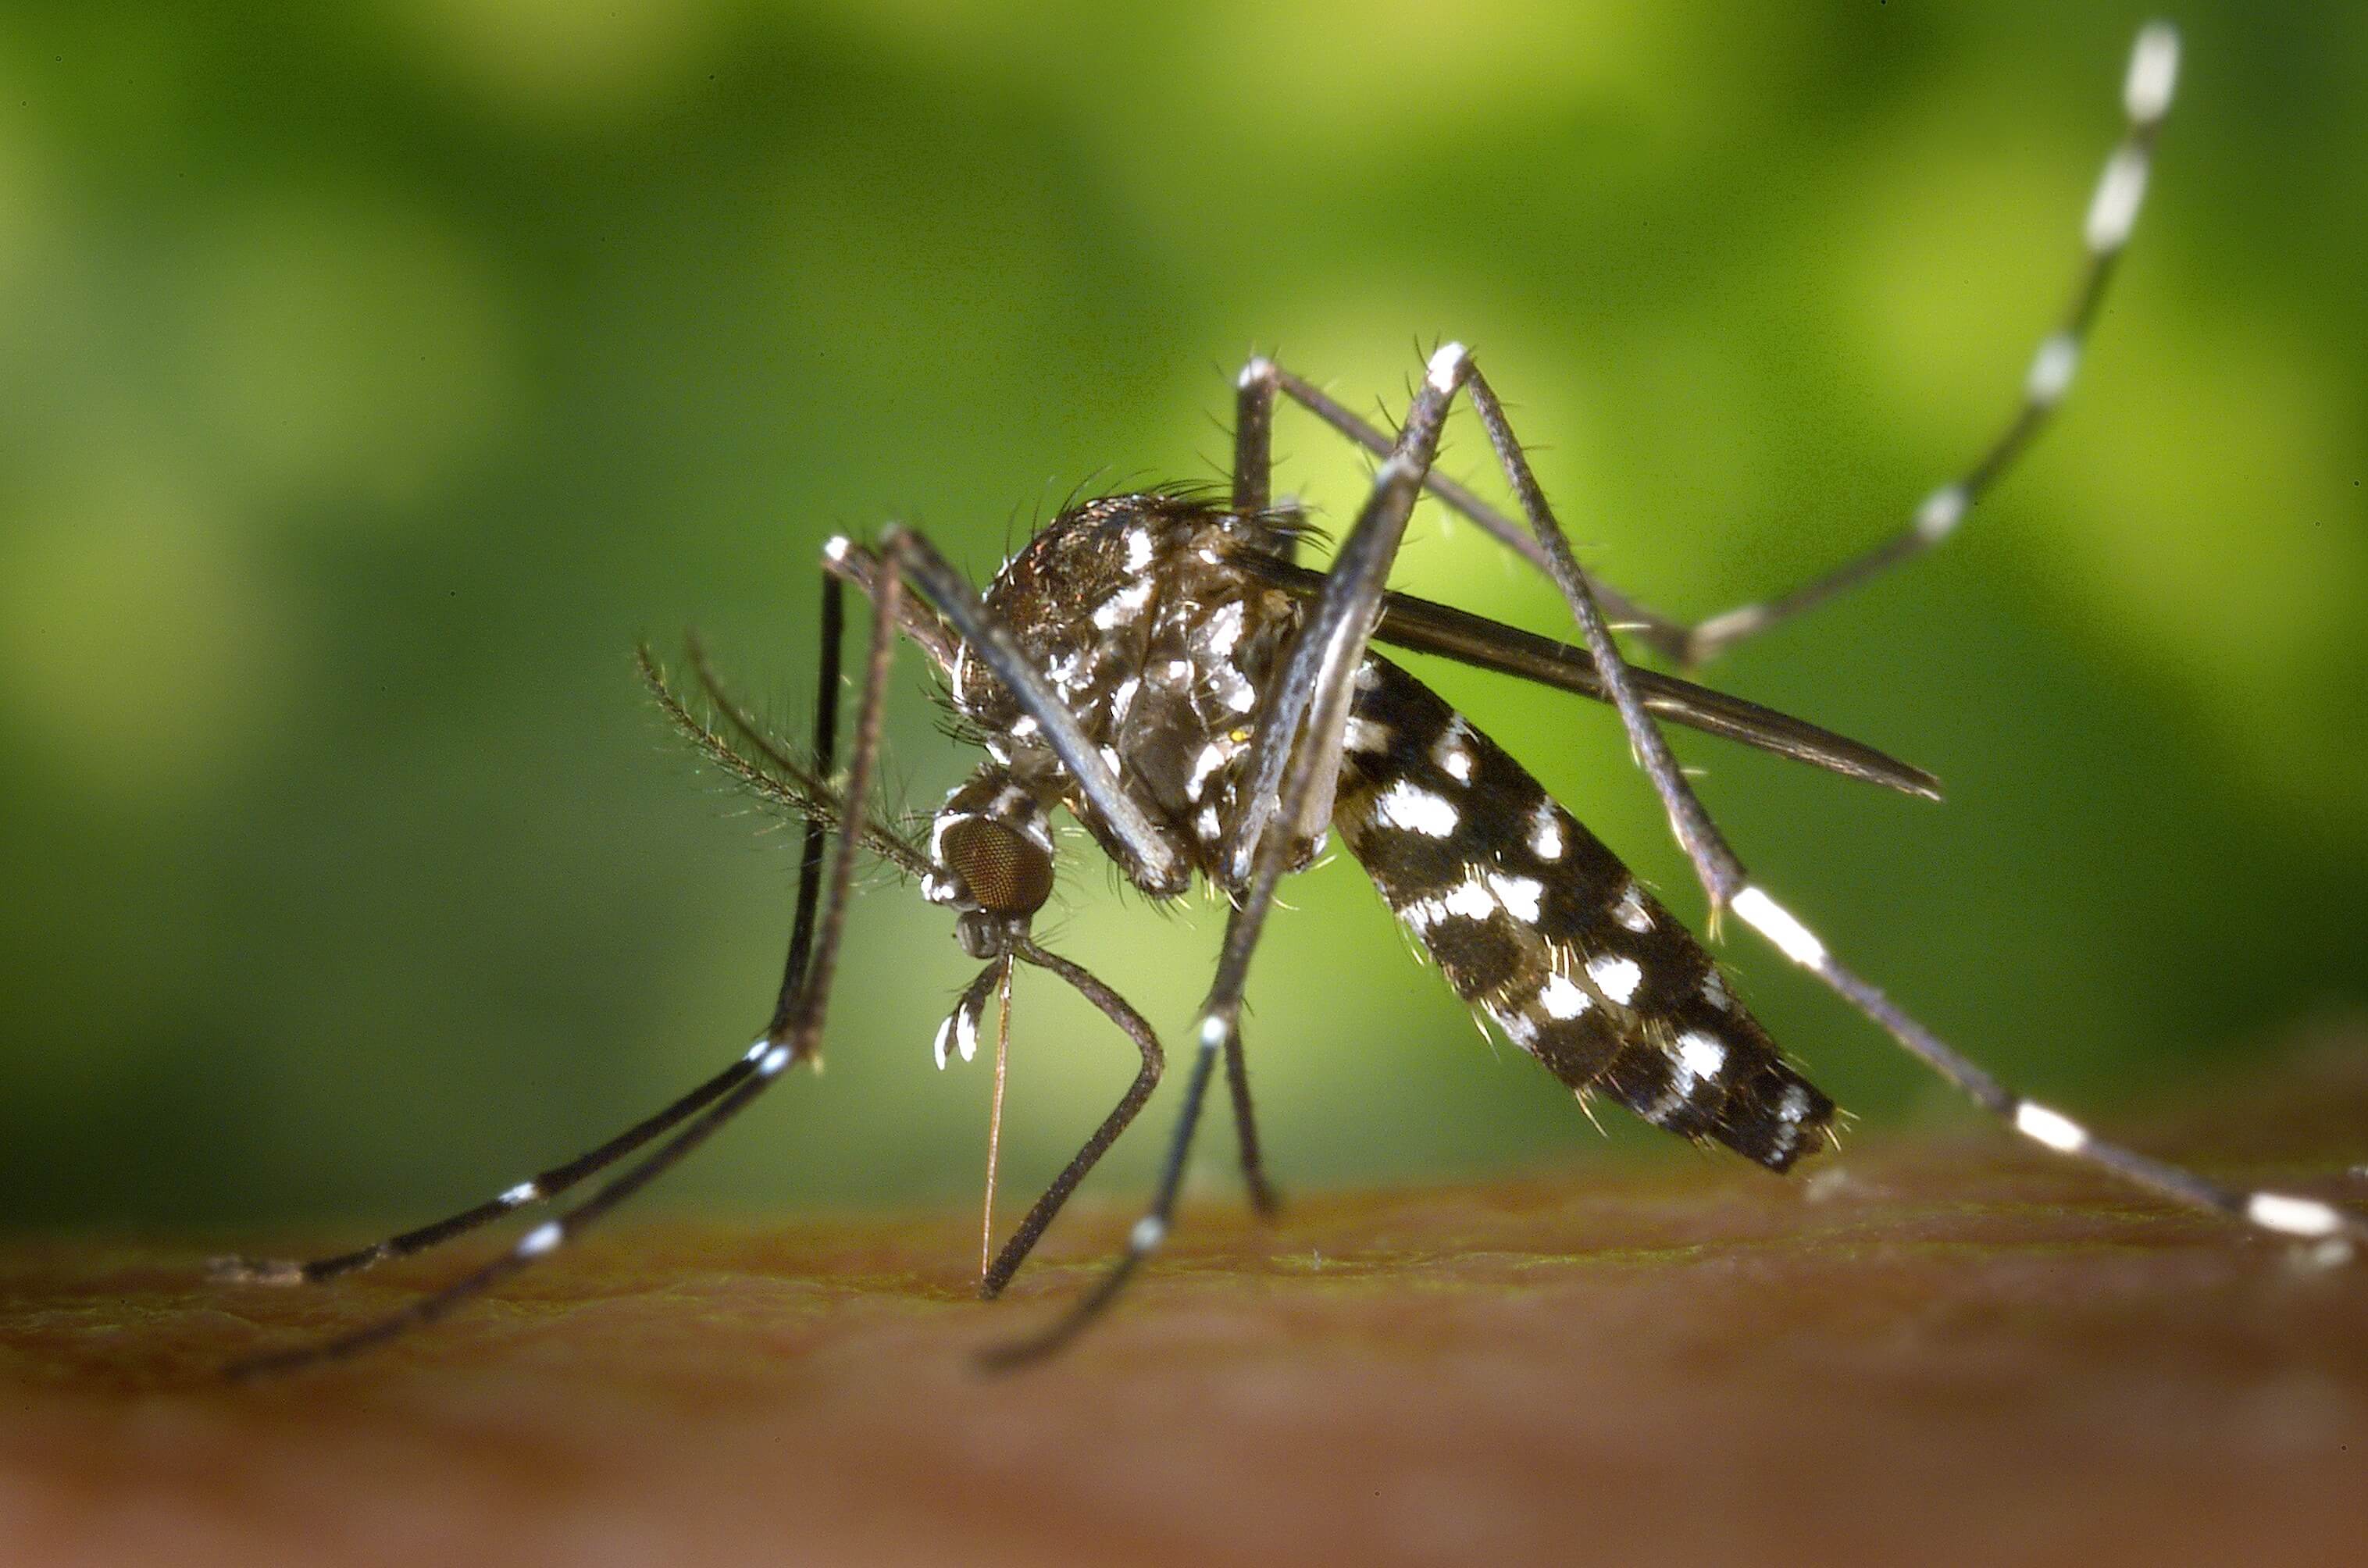 A closeup look at an Aedes albopictus, a problematic pest that bites.